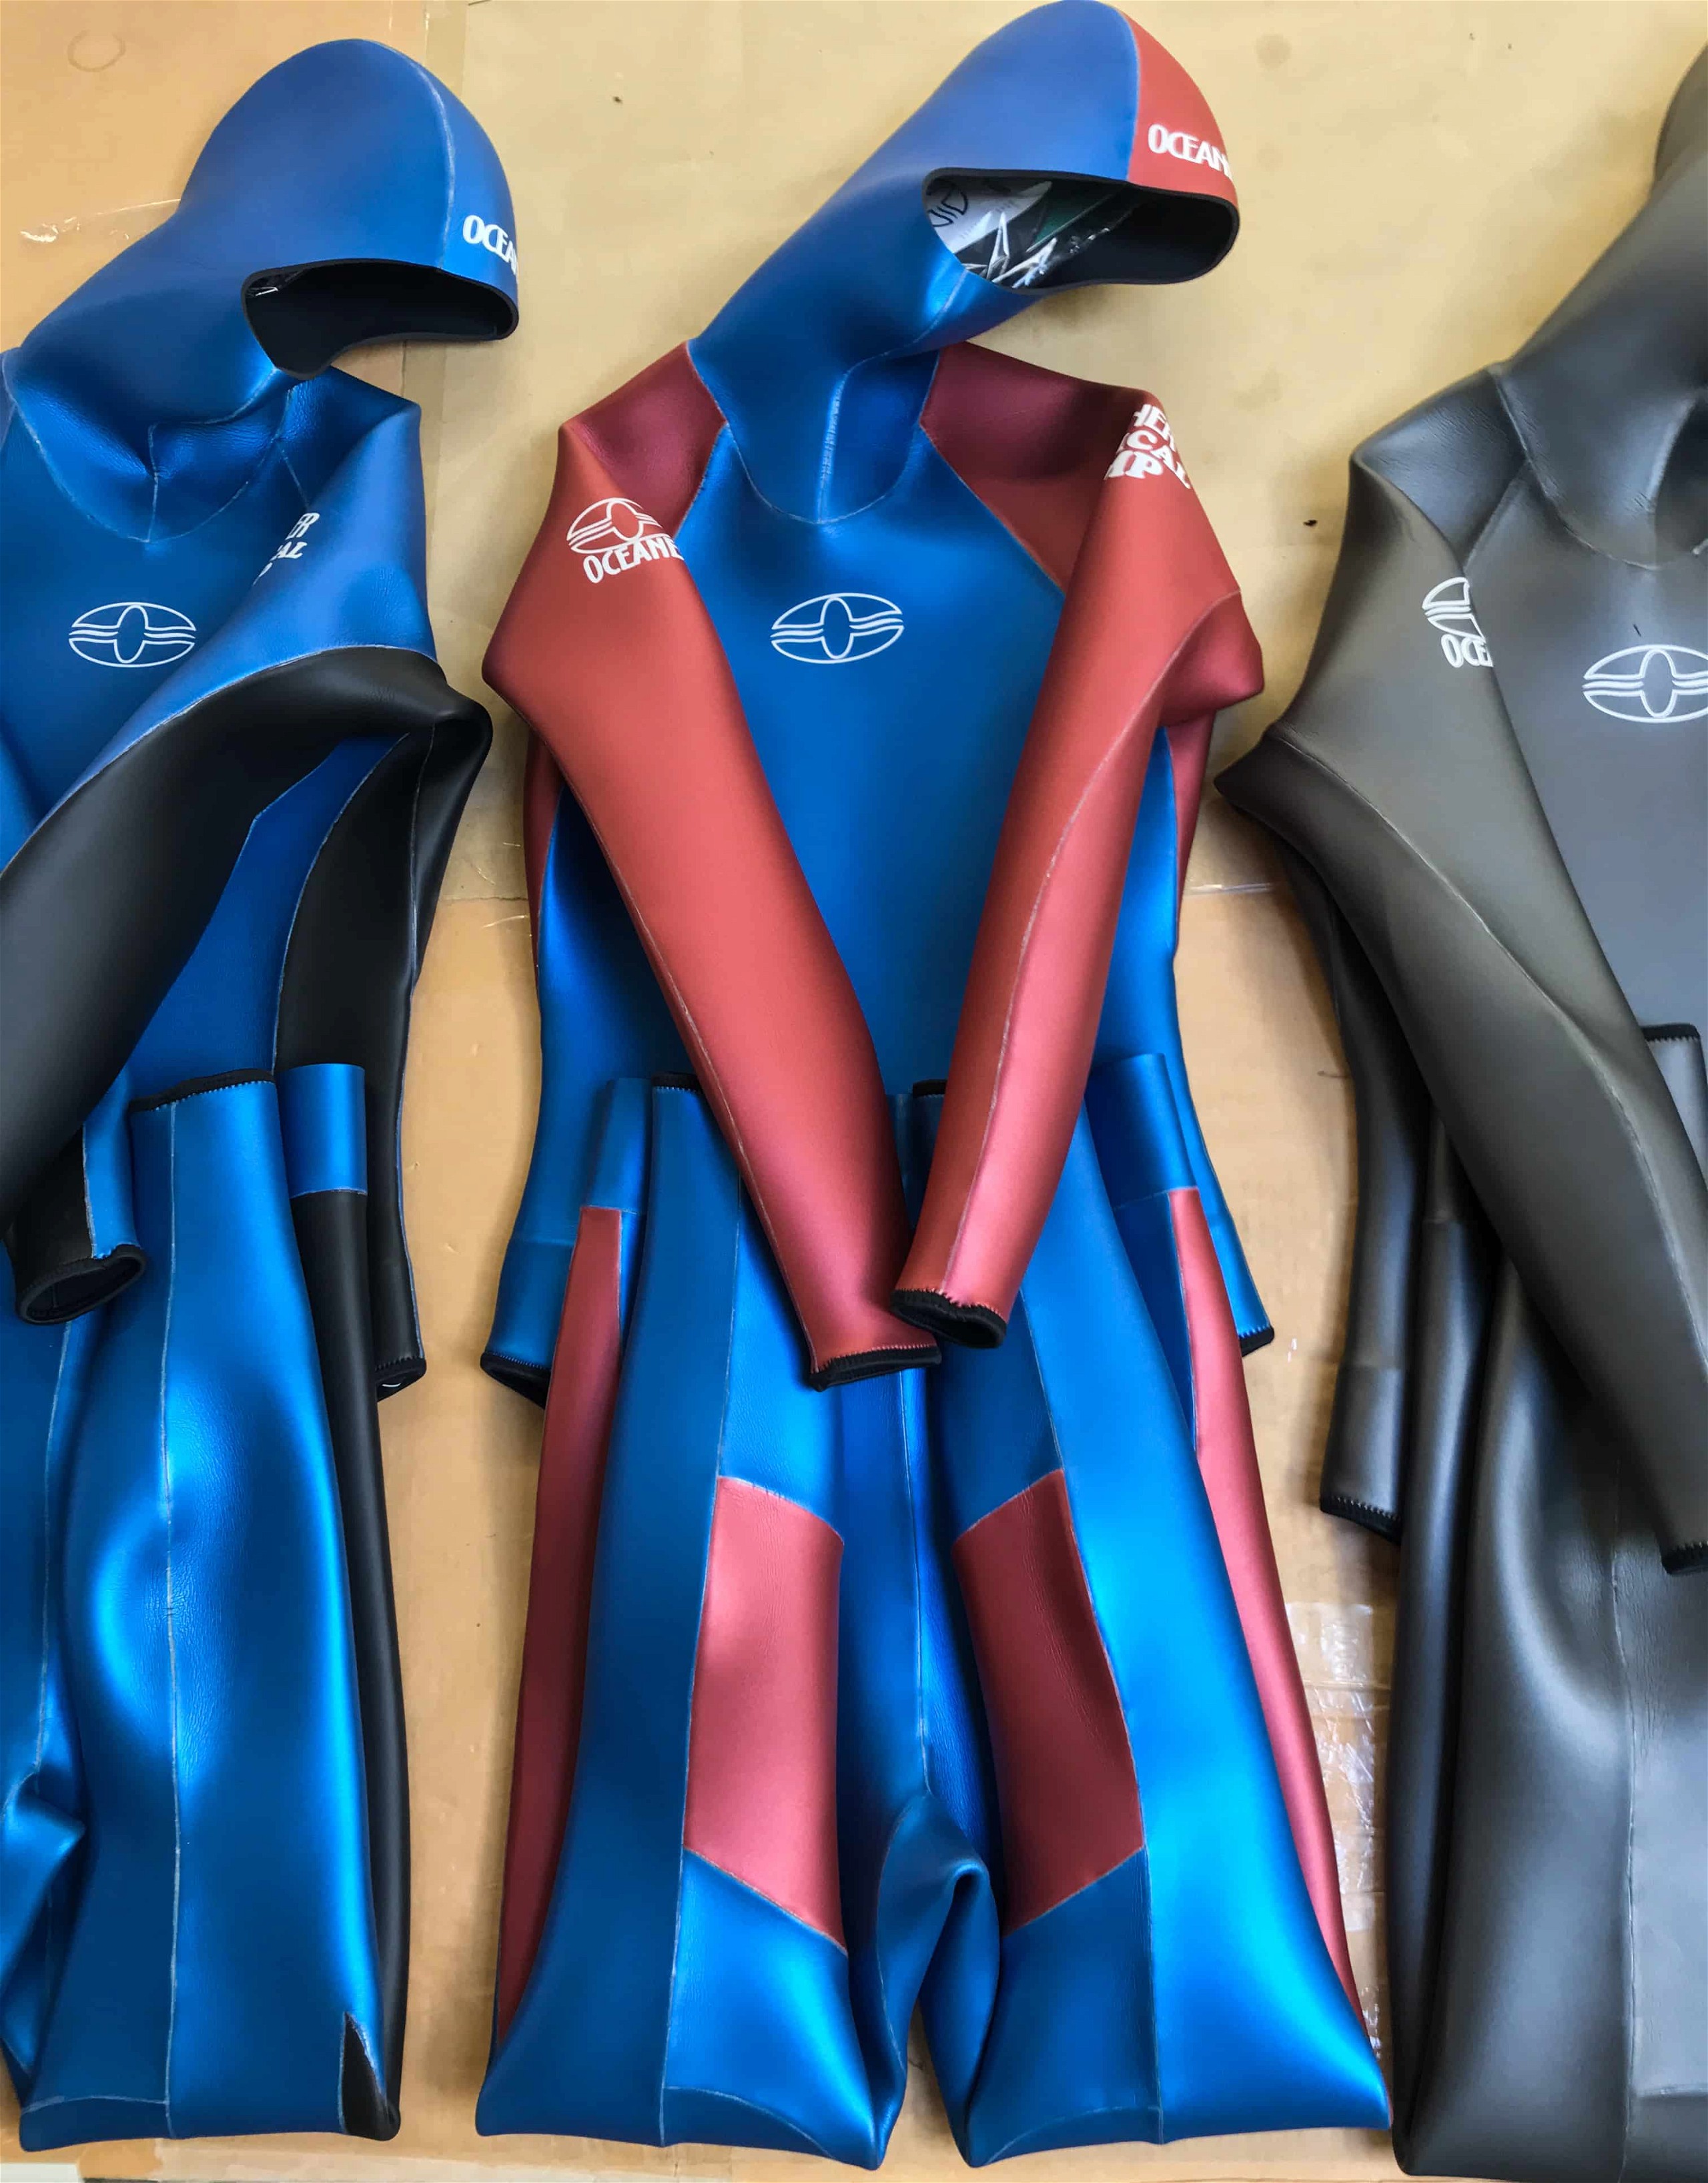 Oceaner Unveils New Tropical COMP Freediving Wetsuit